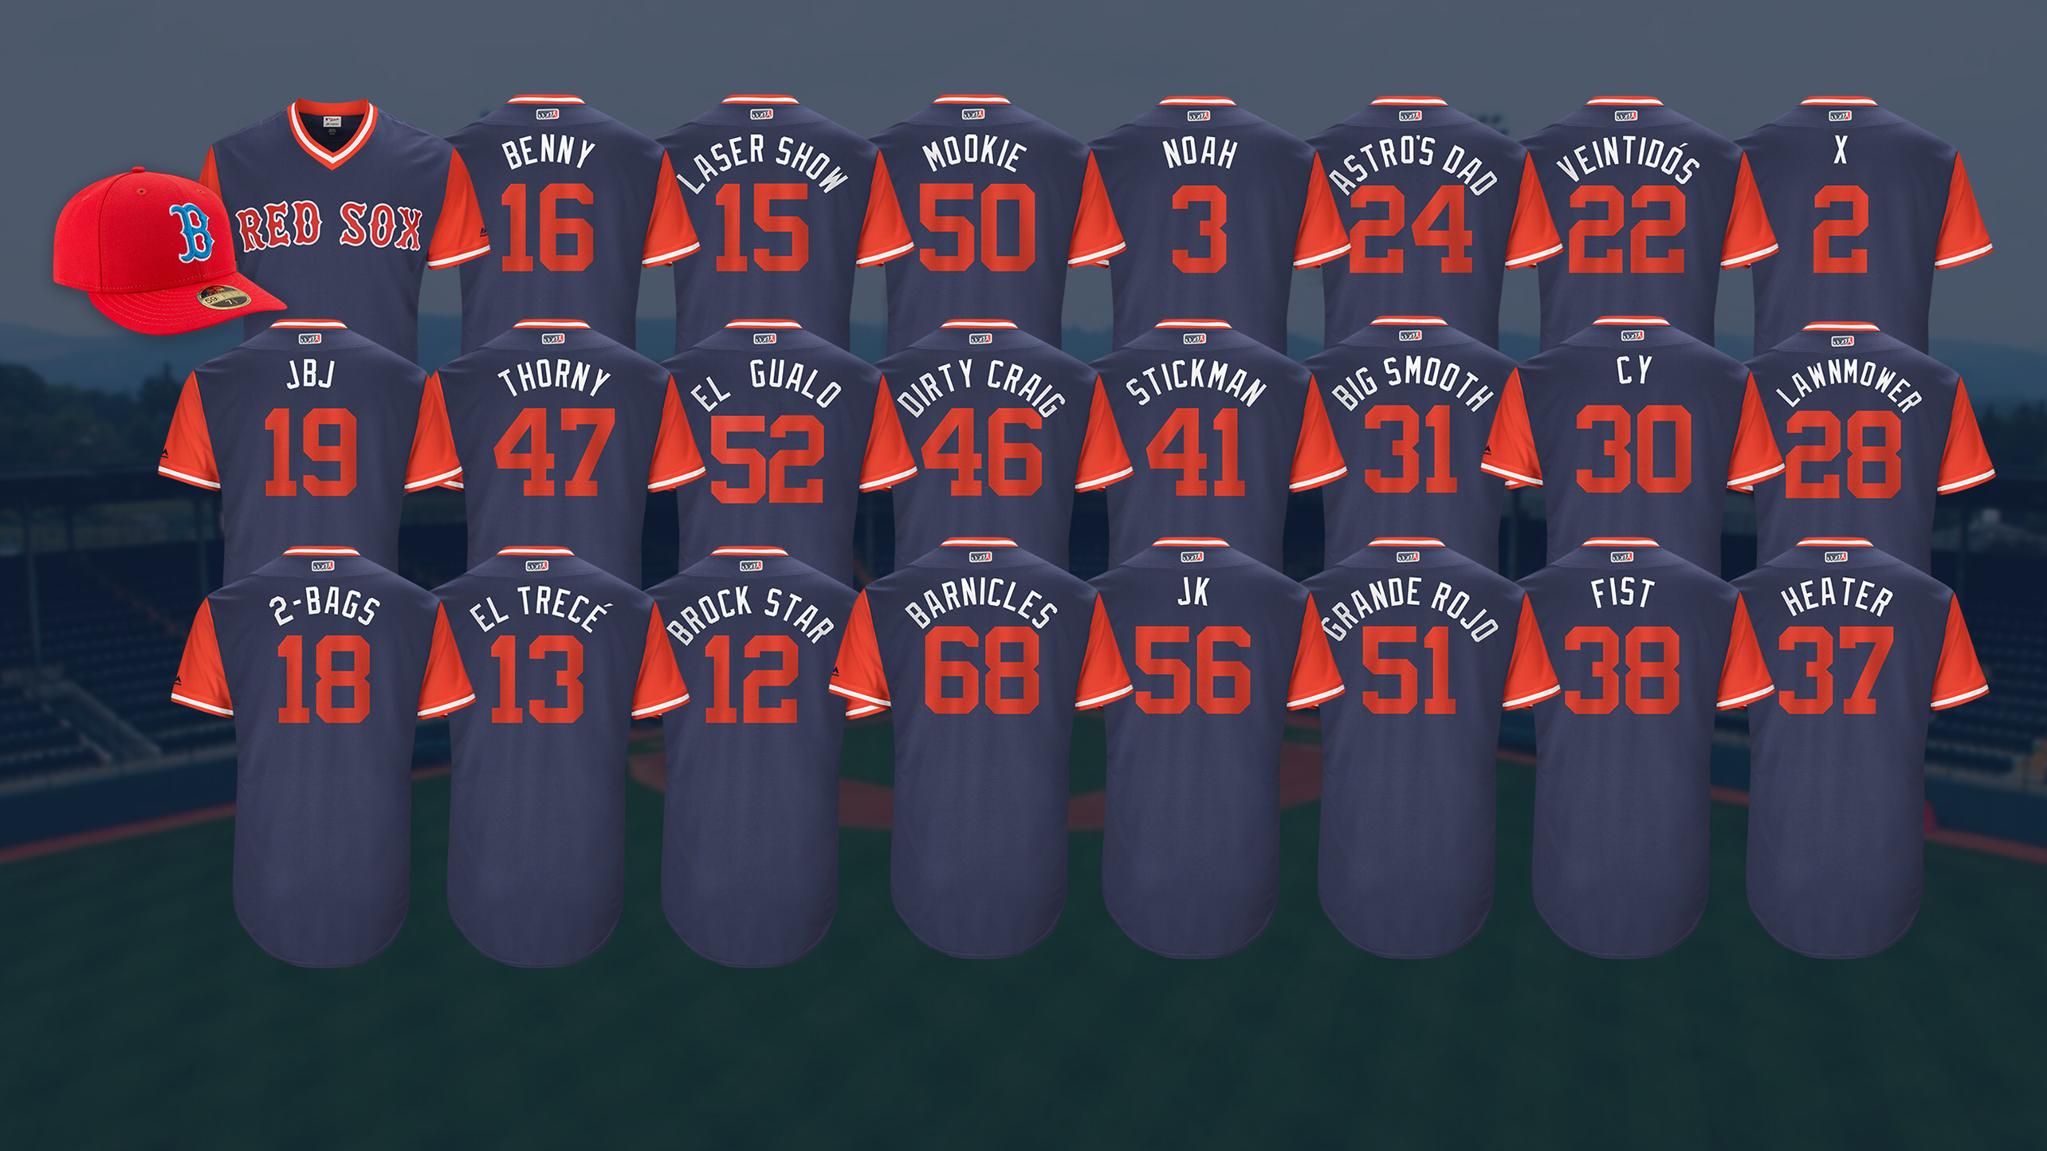 red sox players weekend 2019